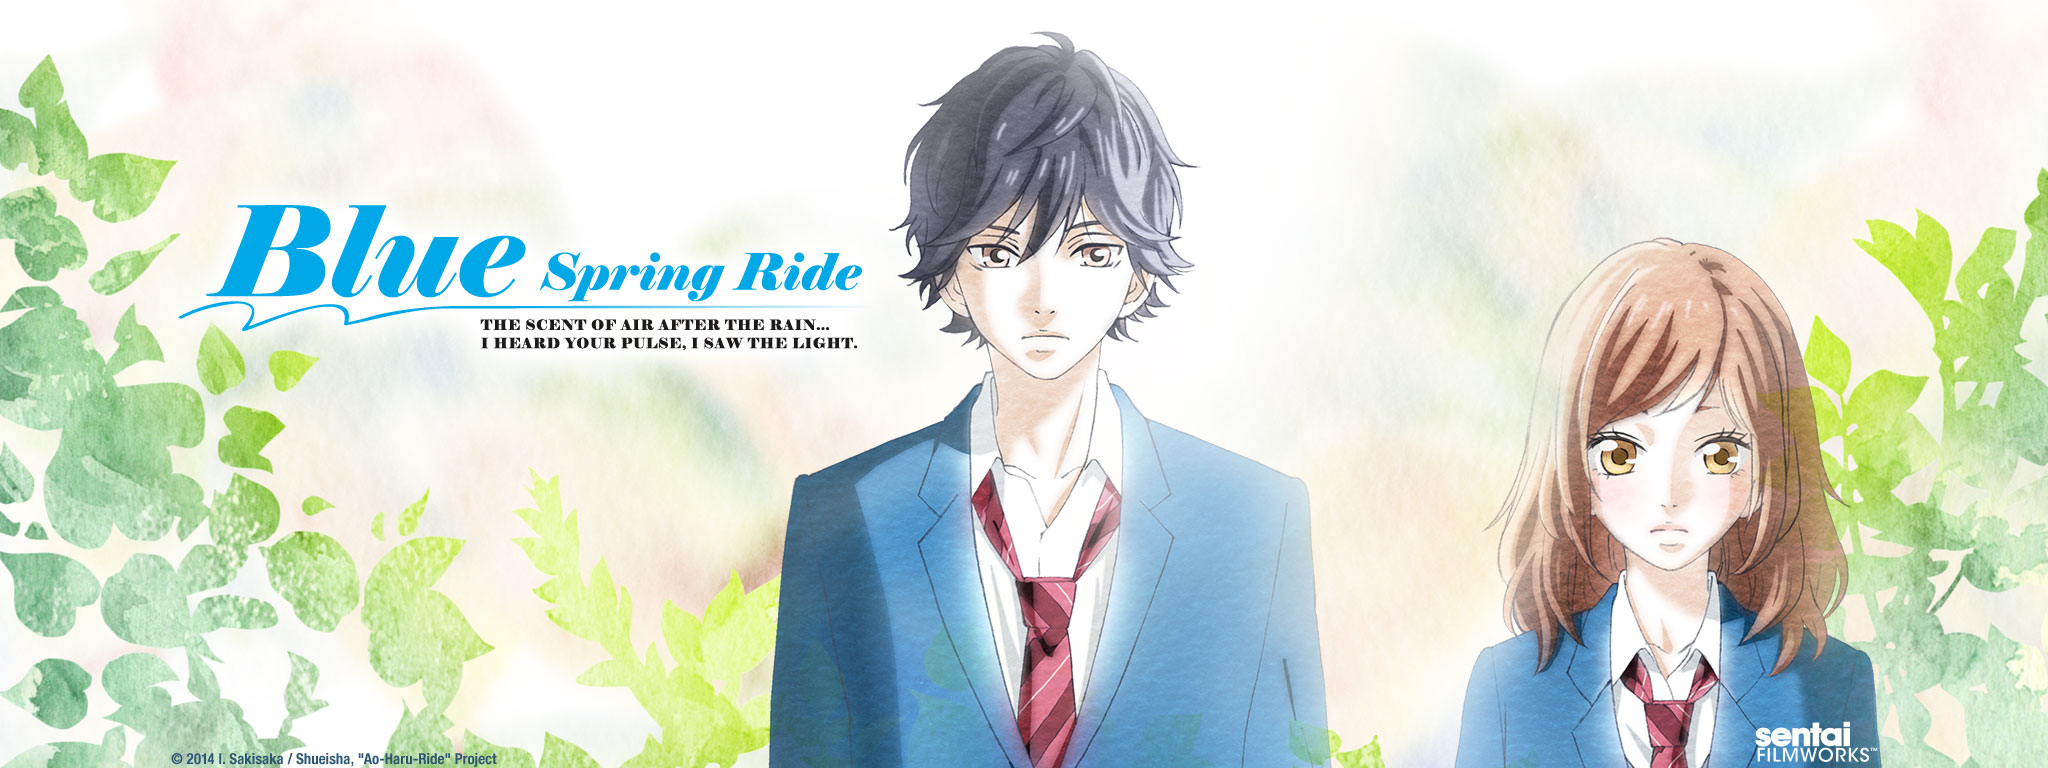 Title Art for Blue Spring Ride